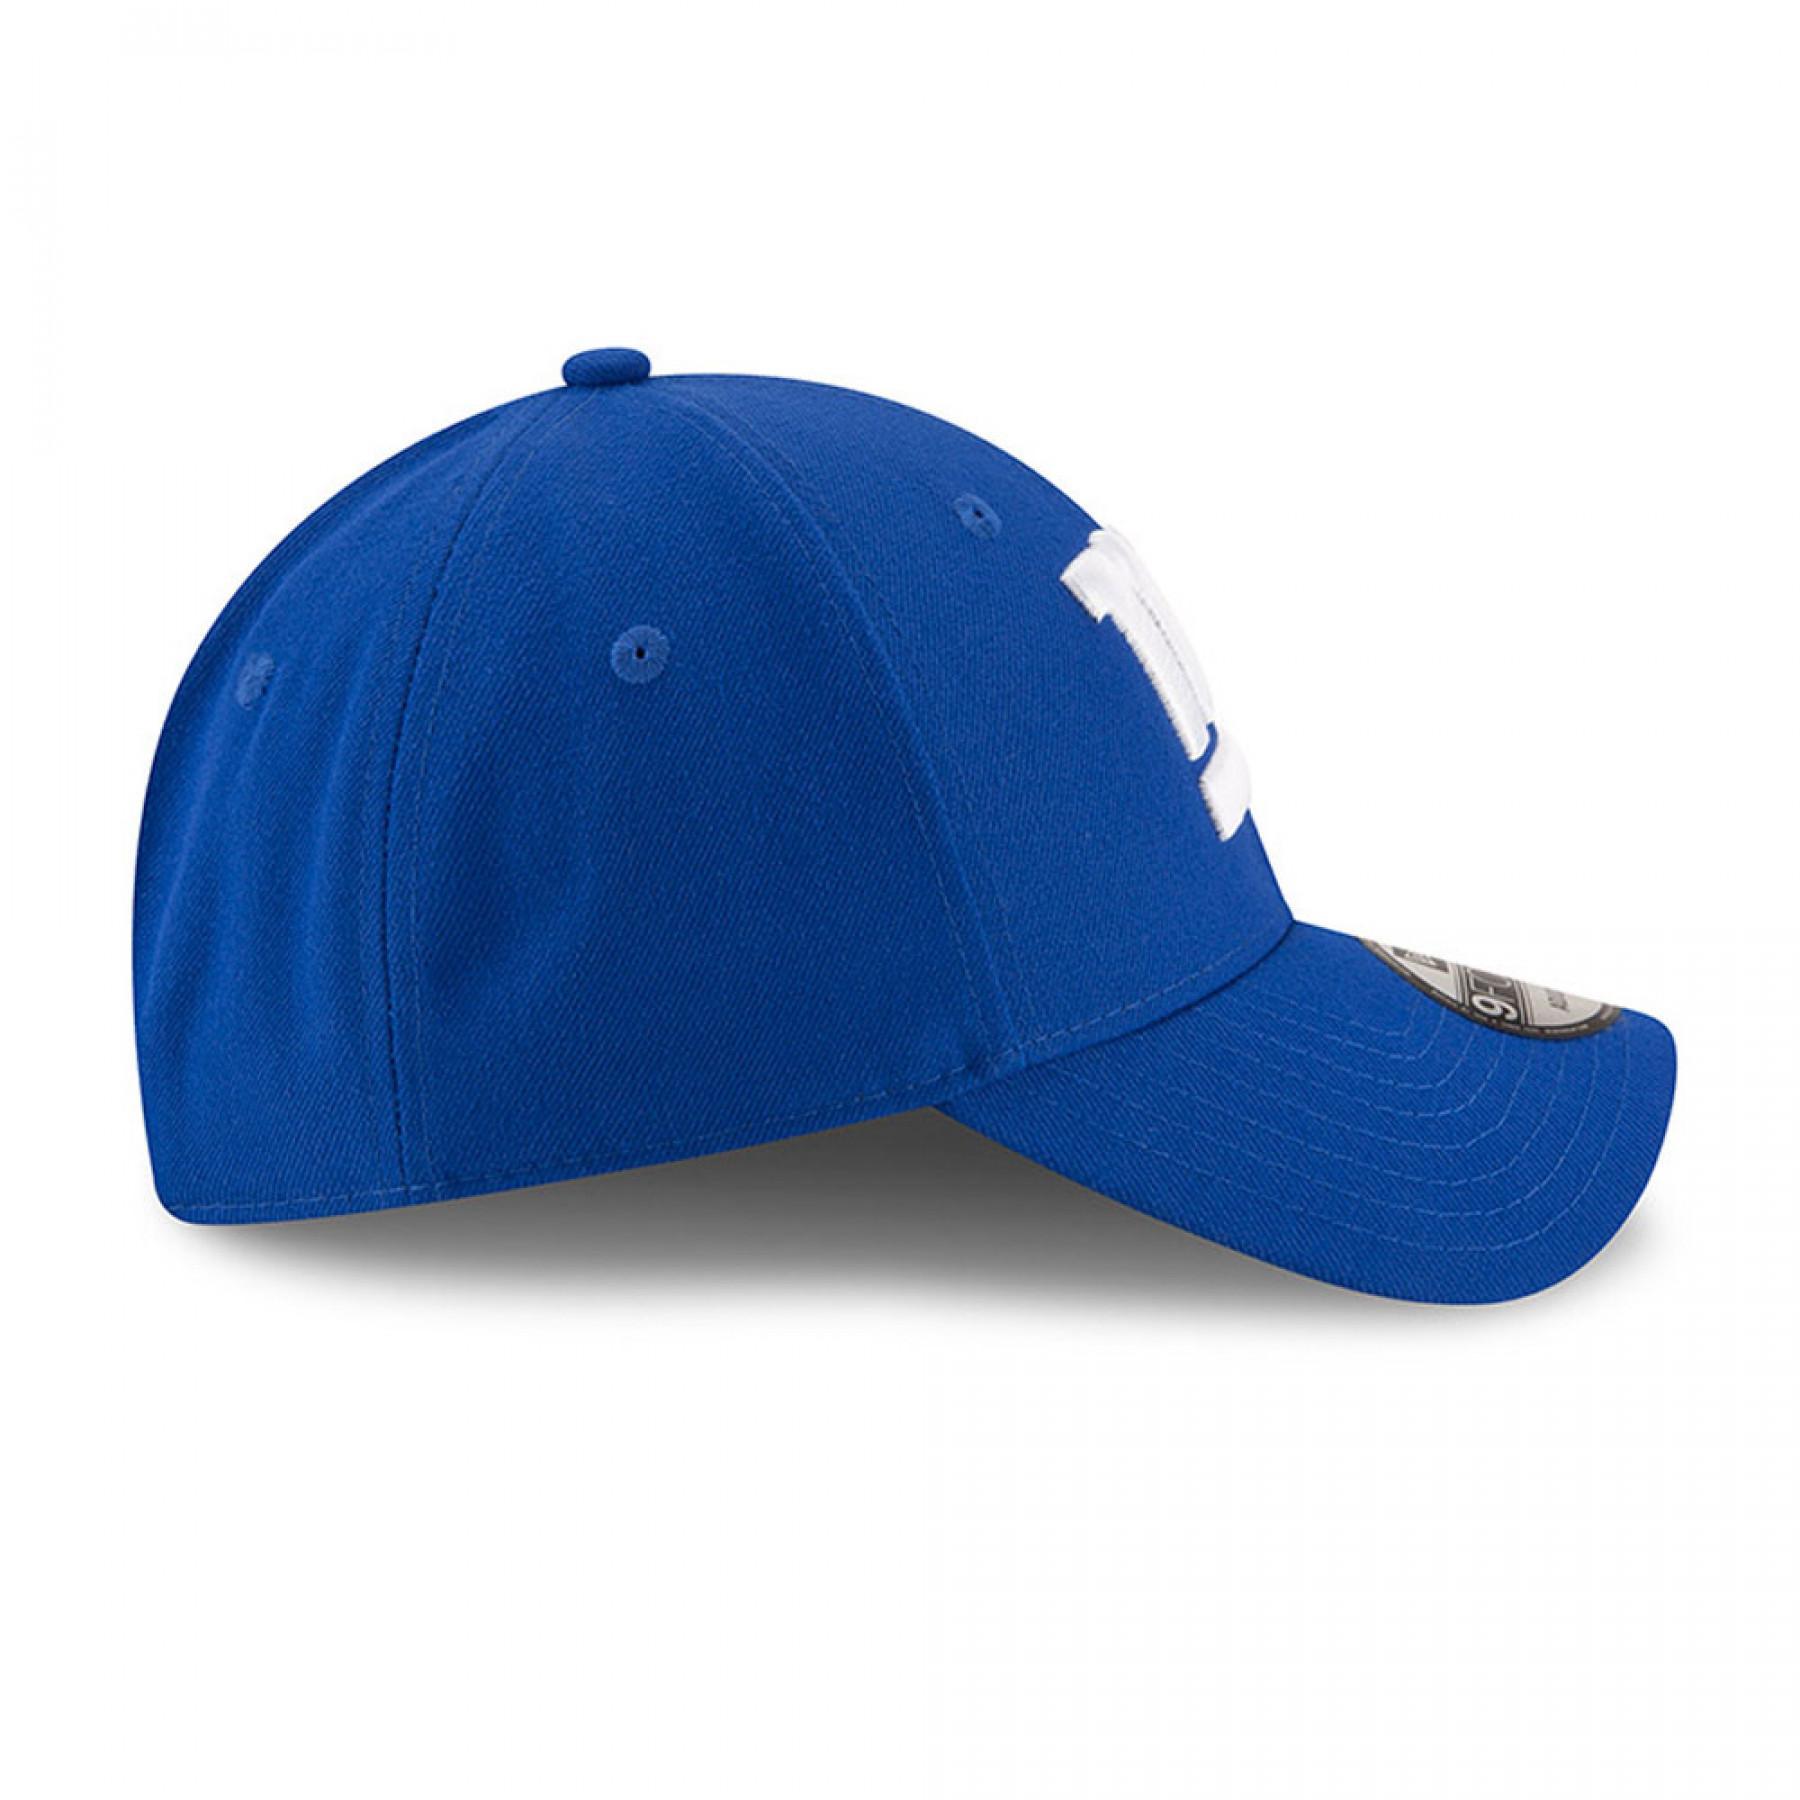 Casquette New Era The League 9forty New York Giants